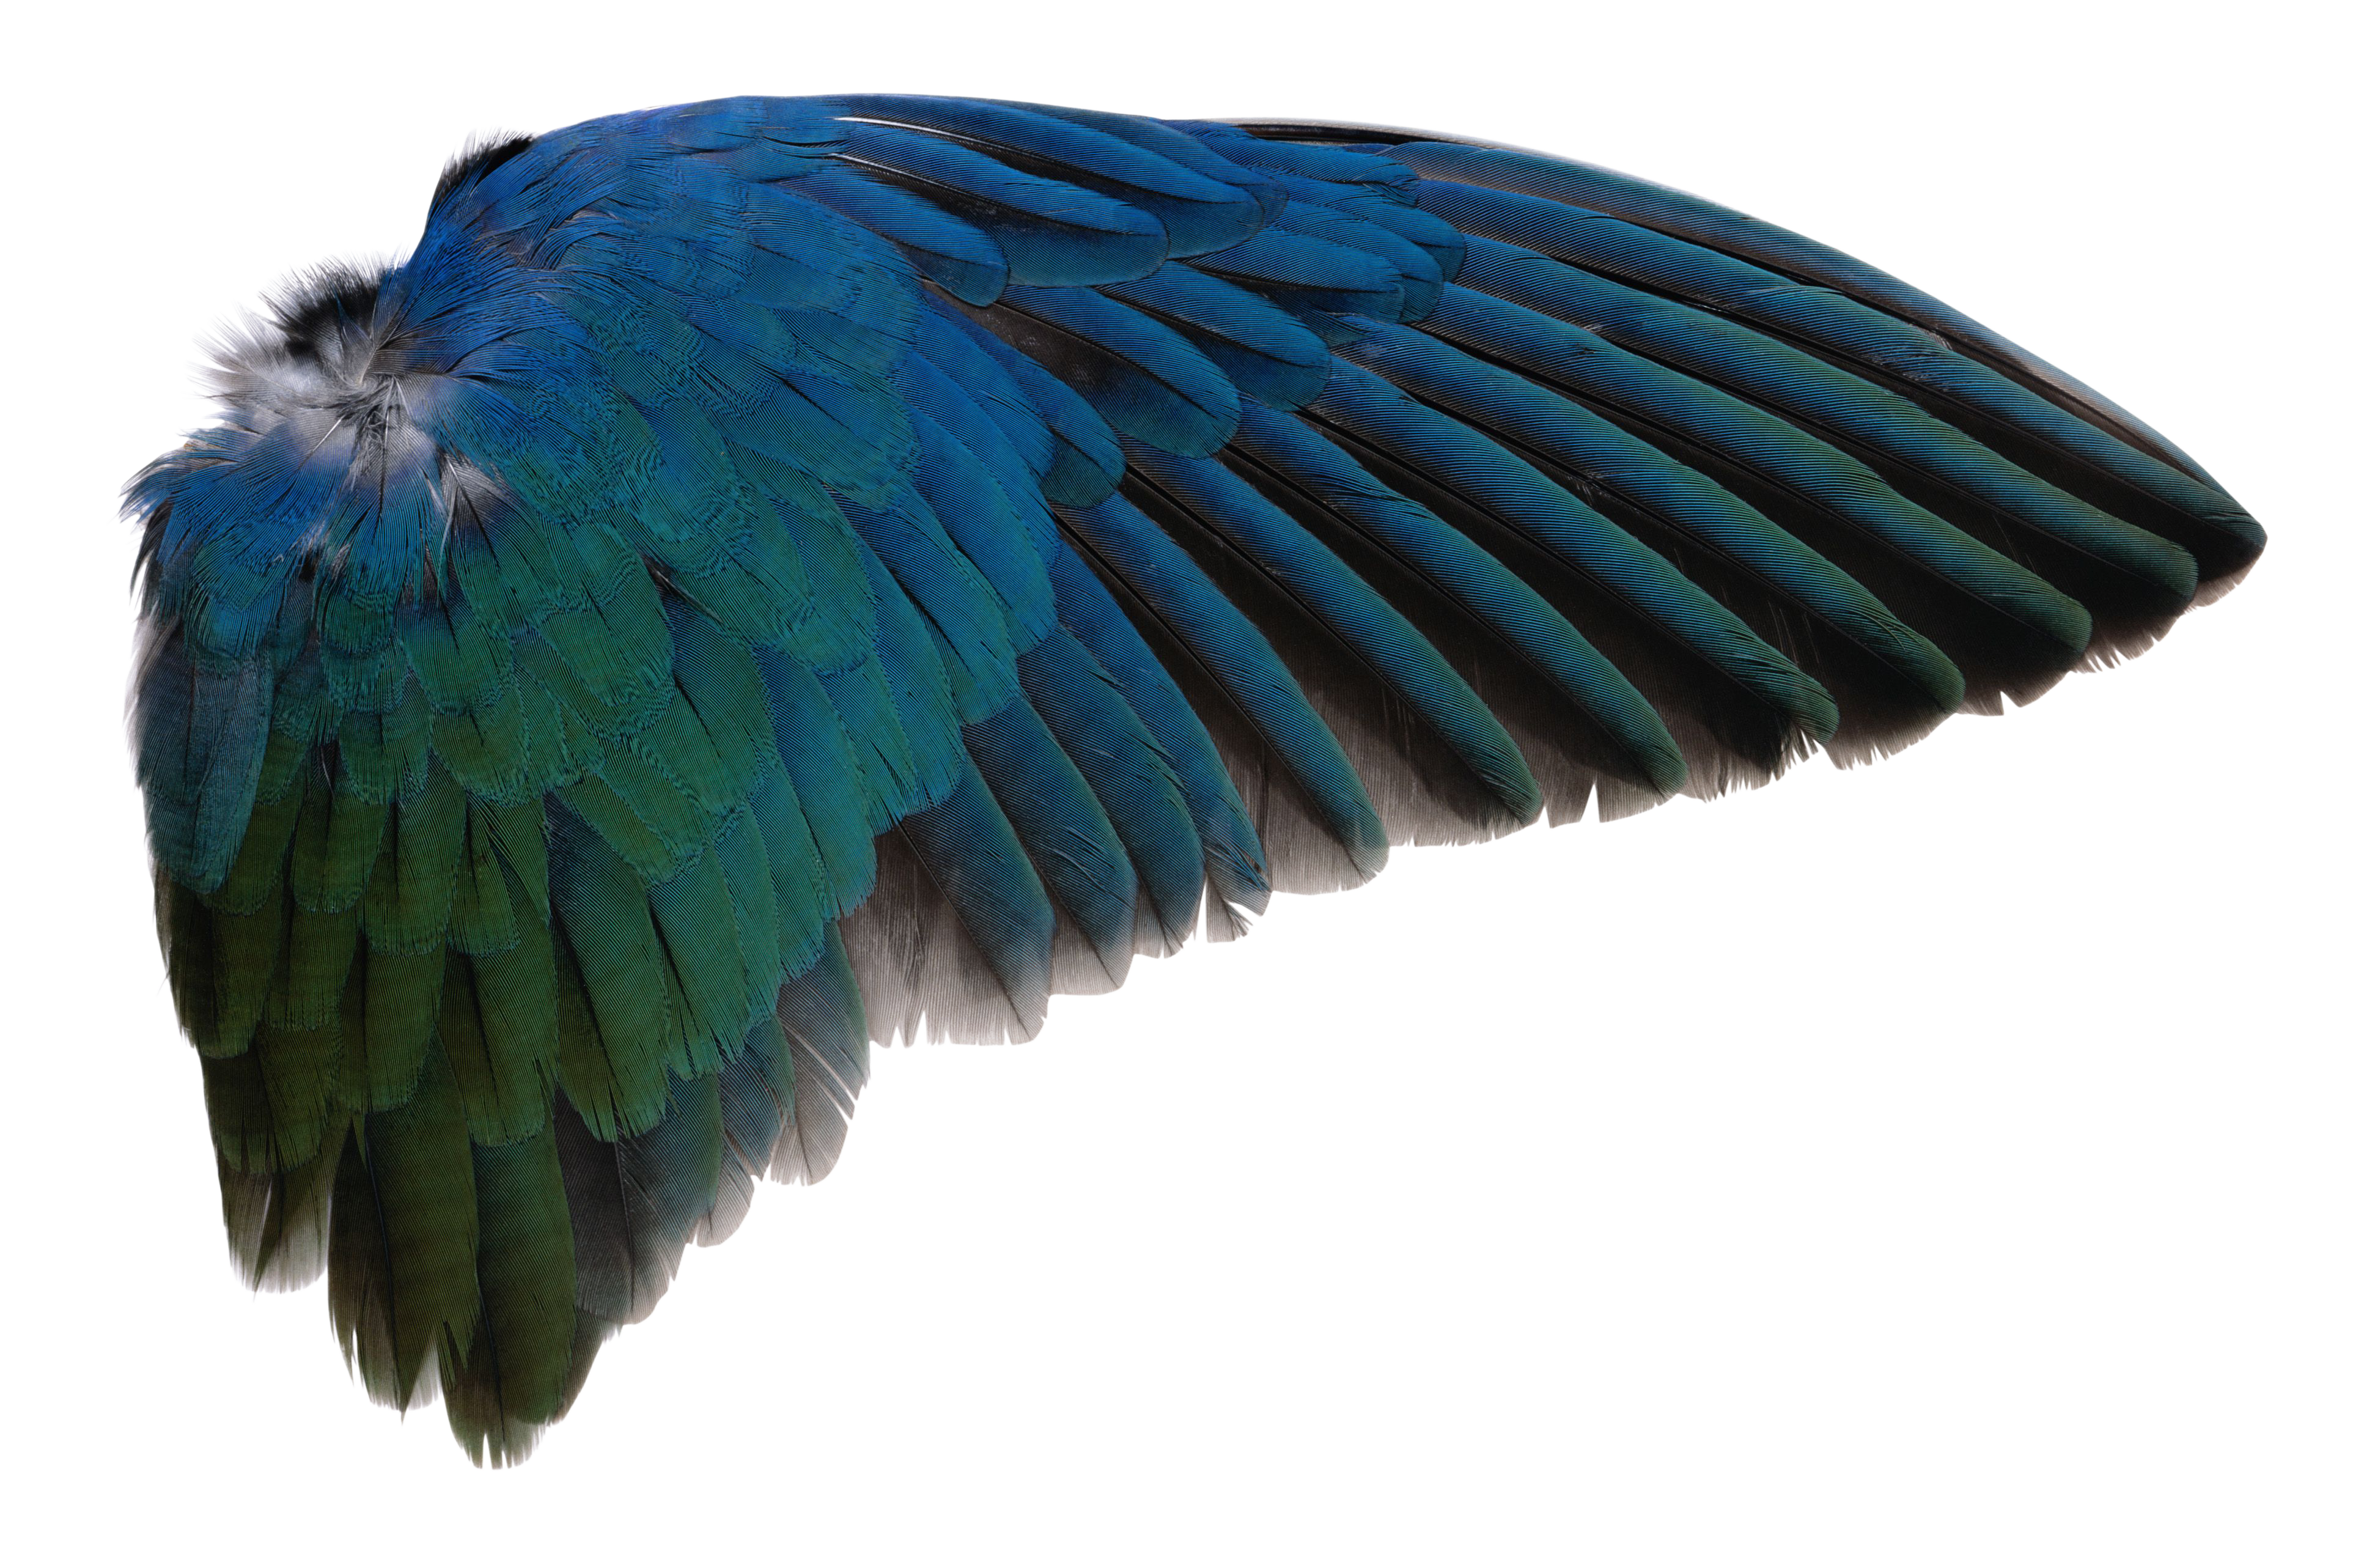 Clipart library: More Like Wing PNG by AbsurdWordPreferred